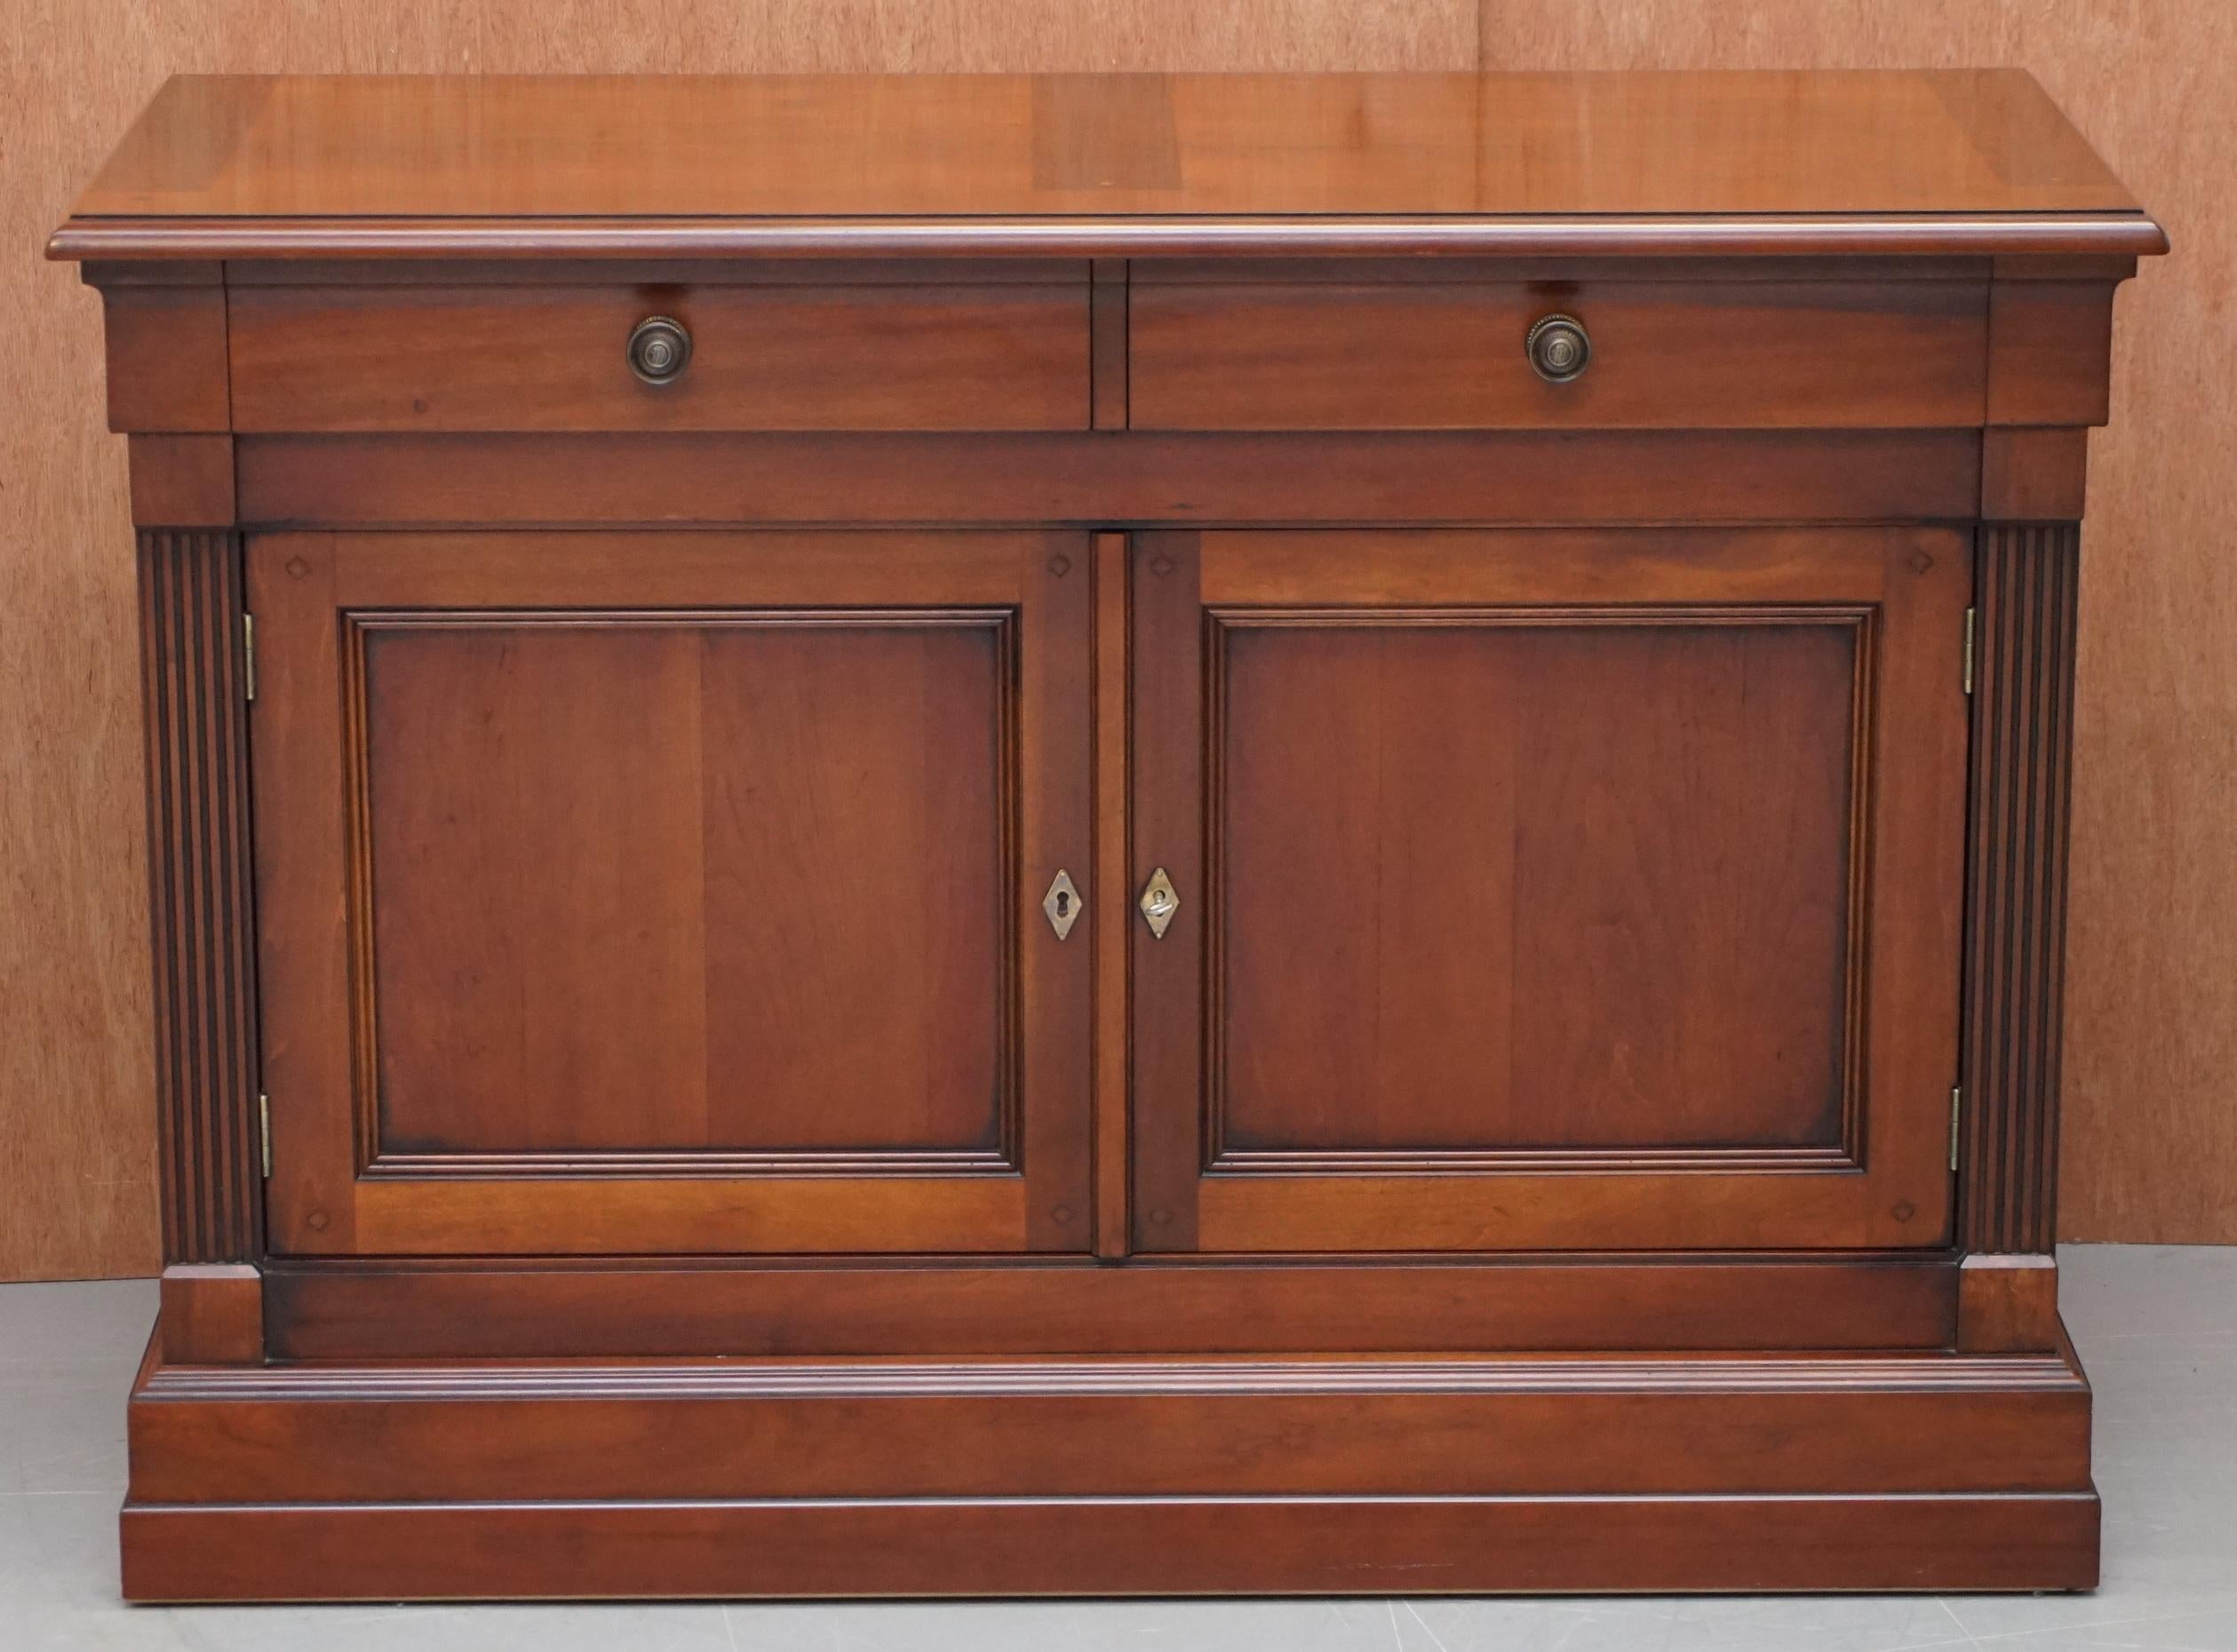 We are delighted to1 of 2 solid cherrywood Grange France sideboards

I have two of these in the suite, this one has two drawers and one large cupboard, the other four drawers, this listing is for the four drawer piece, the other is listed under my